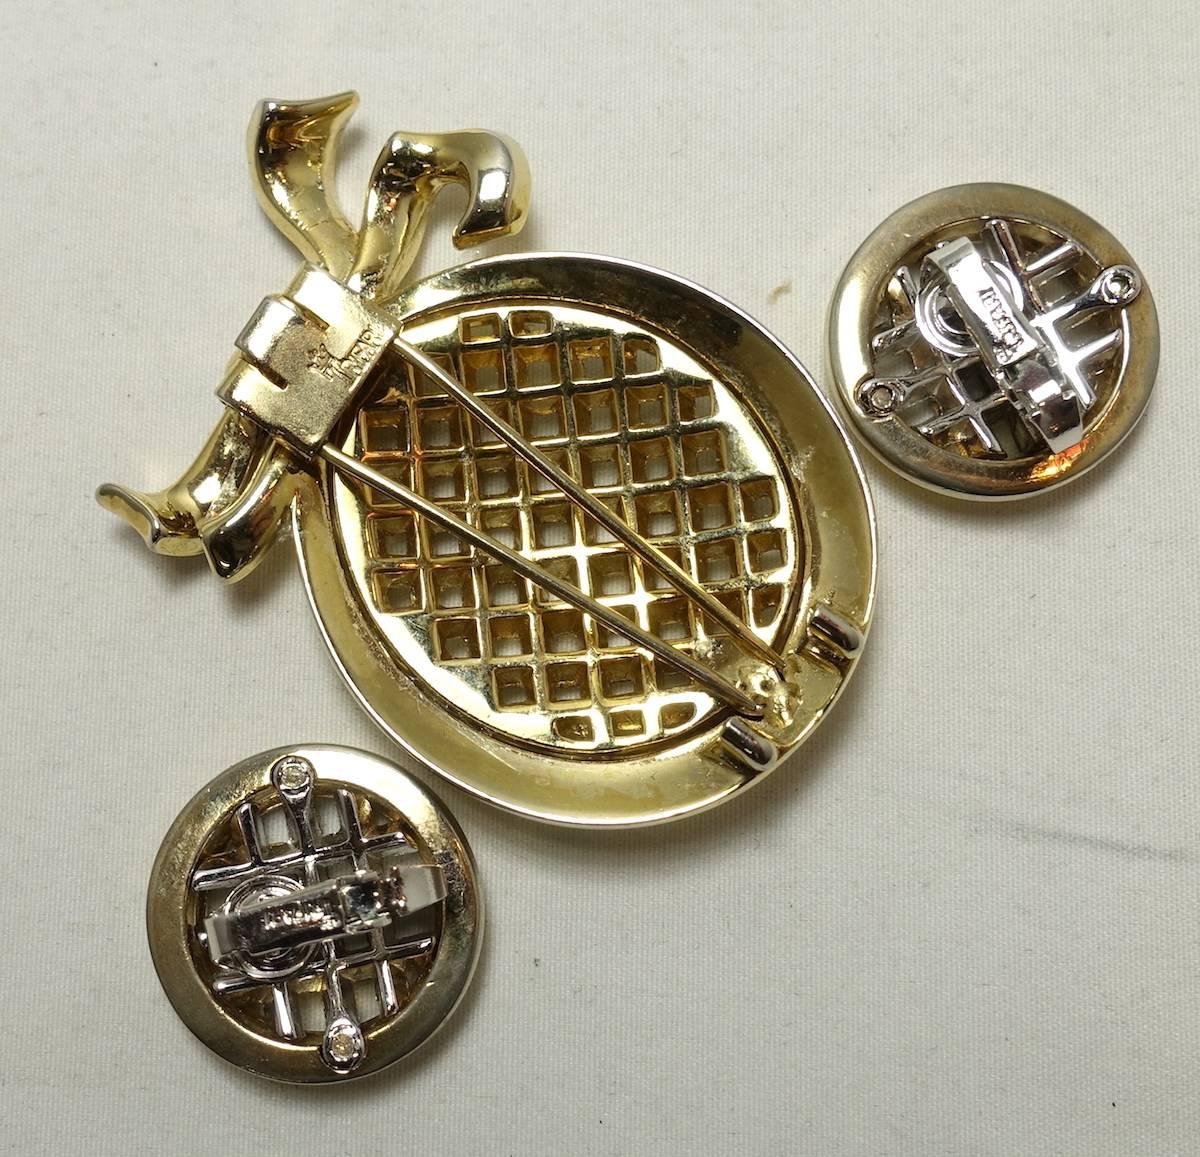 This Trifari 1960’s set includes a brooch with a basket weave center made with clear rhinestone baguettes in a mixed-metal setting. It has bow on top and measures 2-1/2” x 1-1/2”. The matching clip earrings measure 1” x 1”. This set is signed